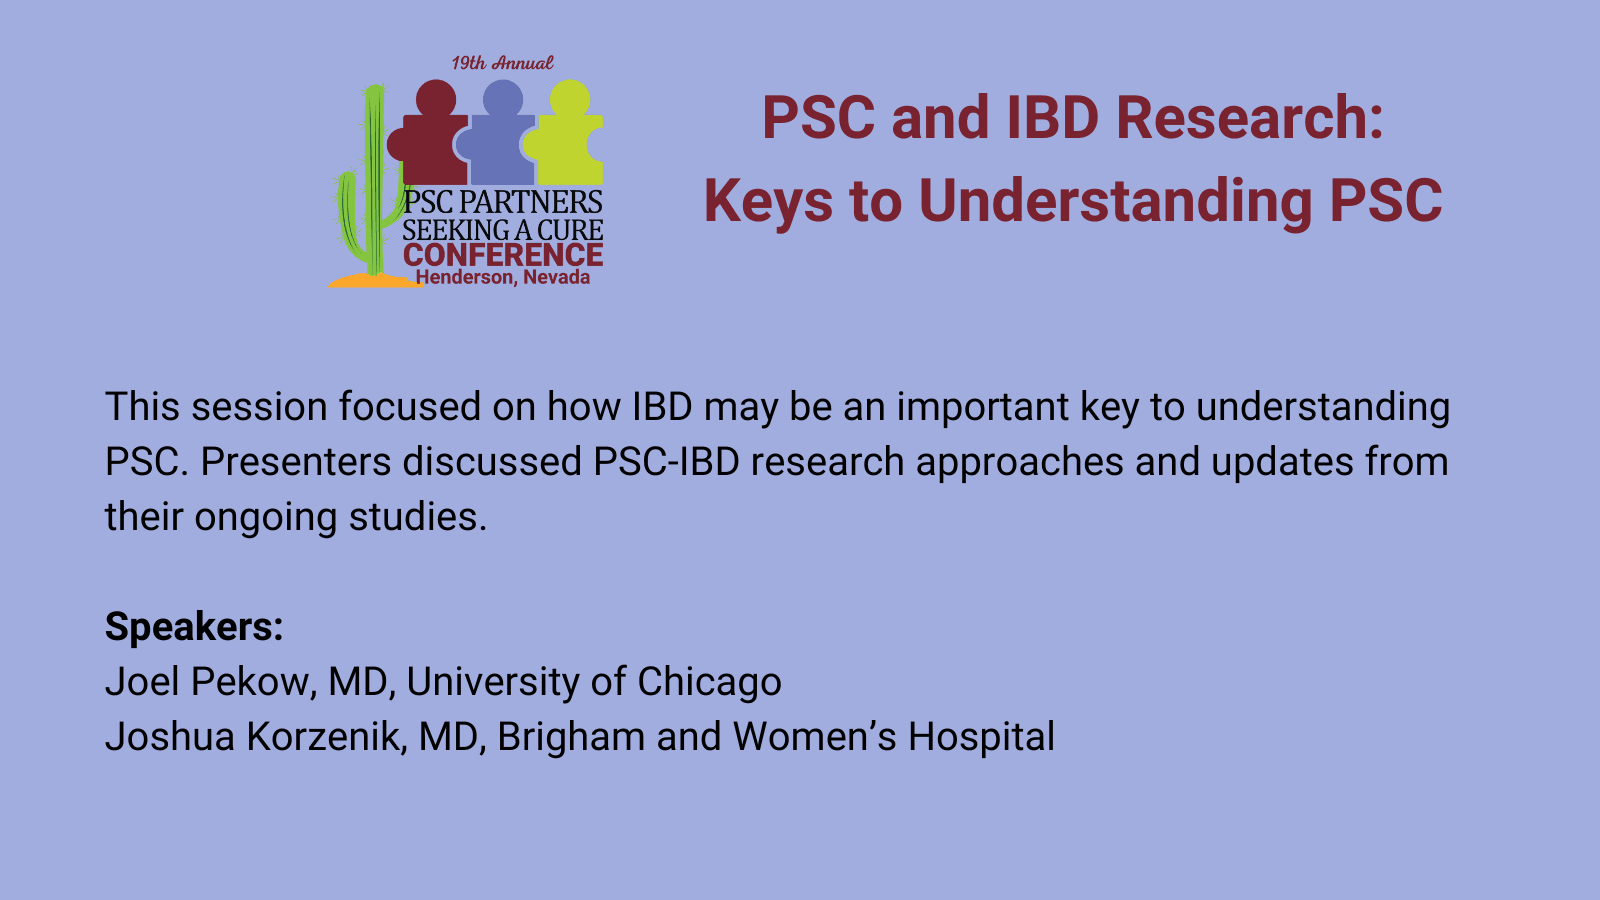 PSC and IBD Research: Keys to Understanding PSC